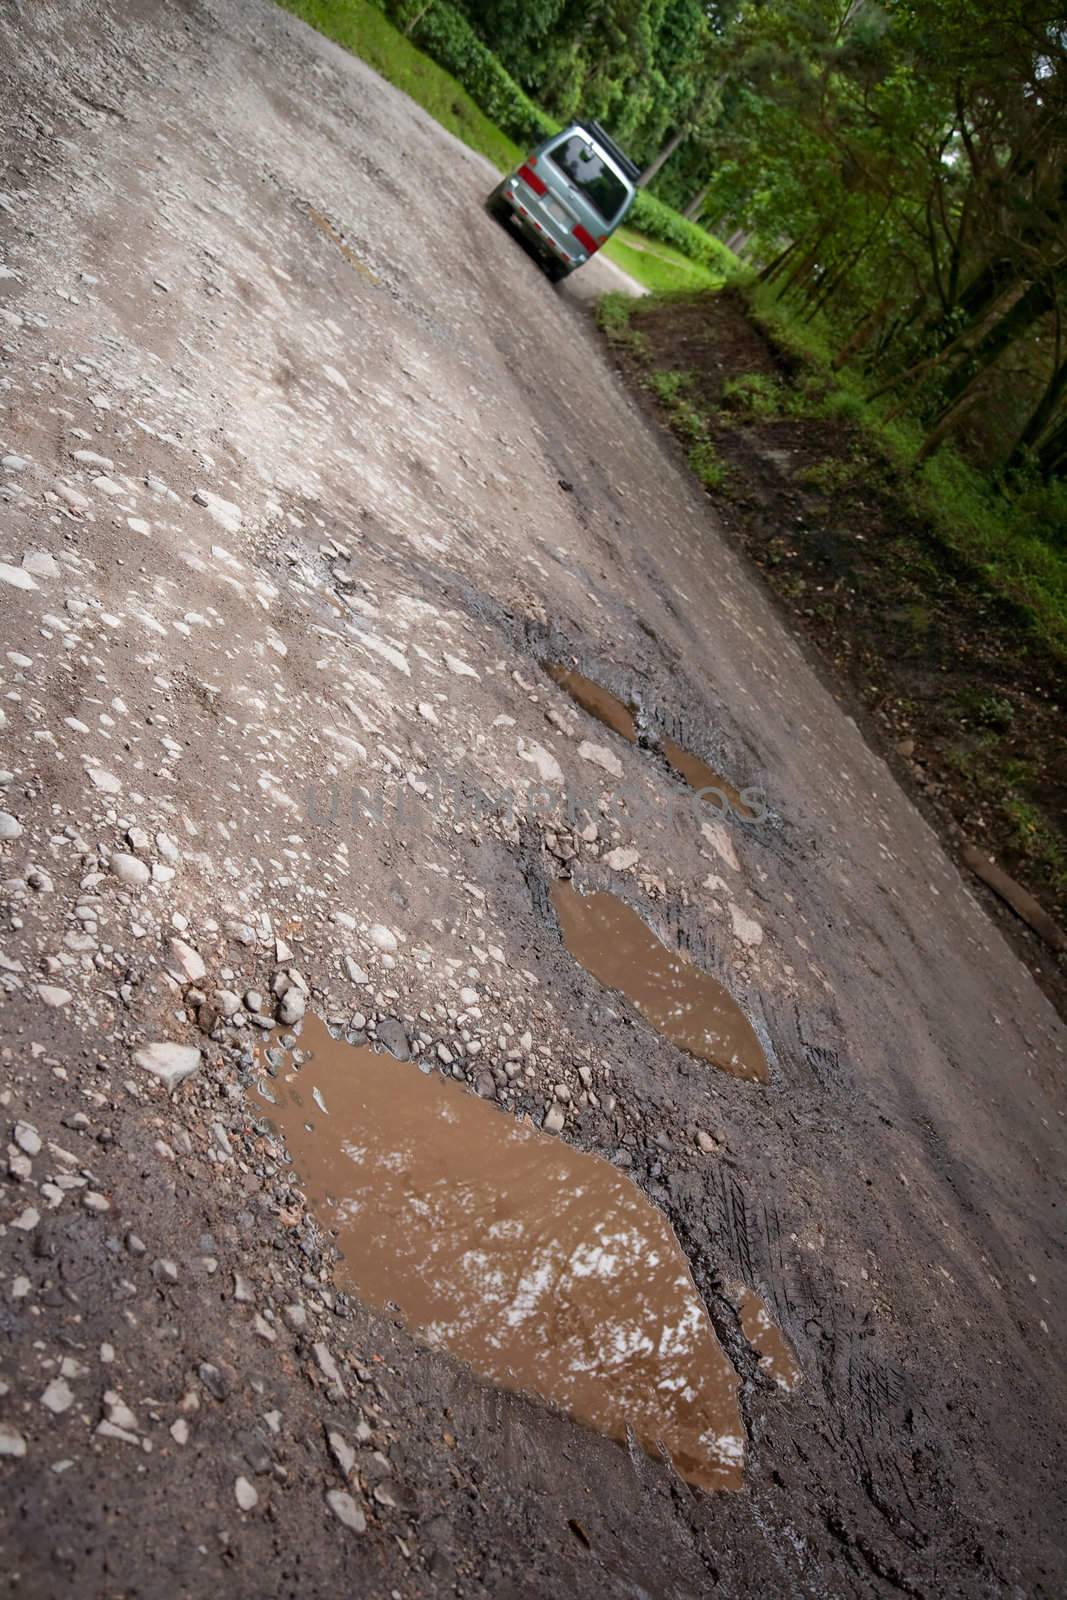 Famous Costa Rica potholes on rugged dirt road